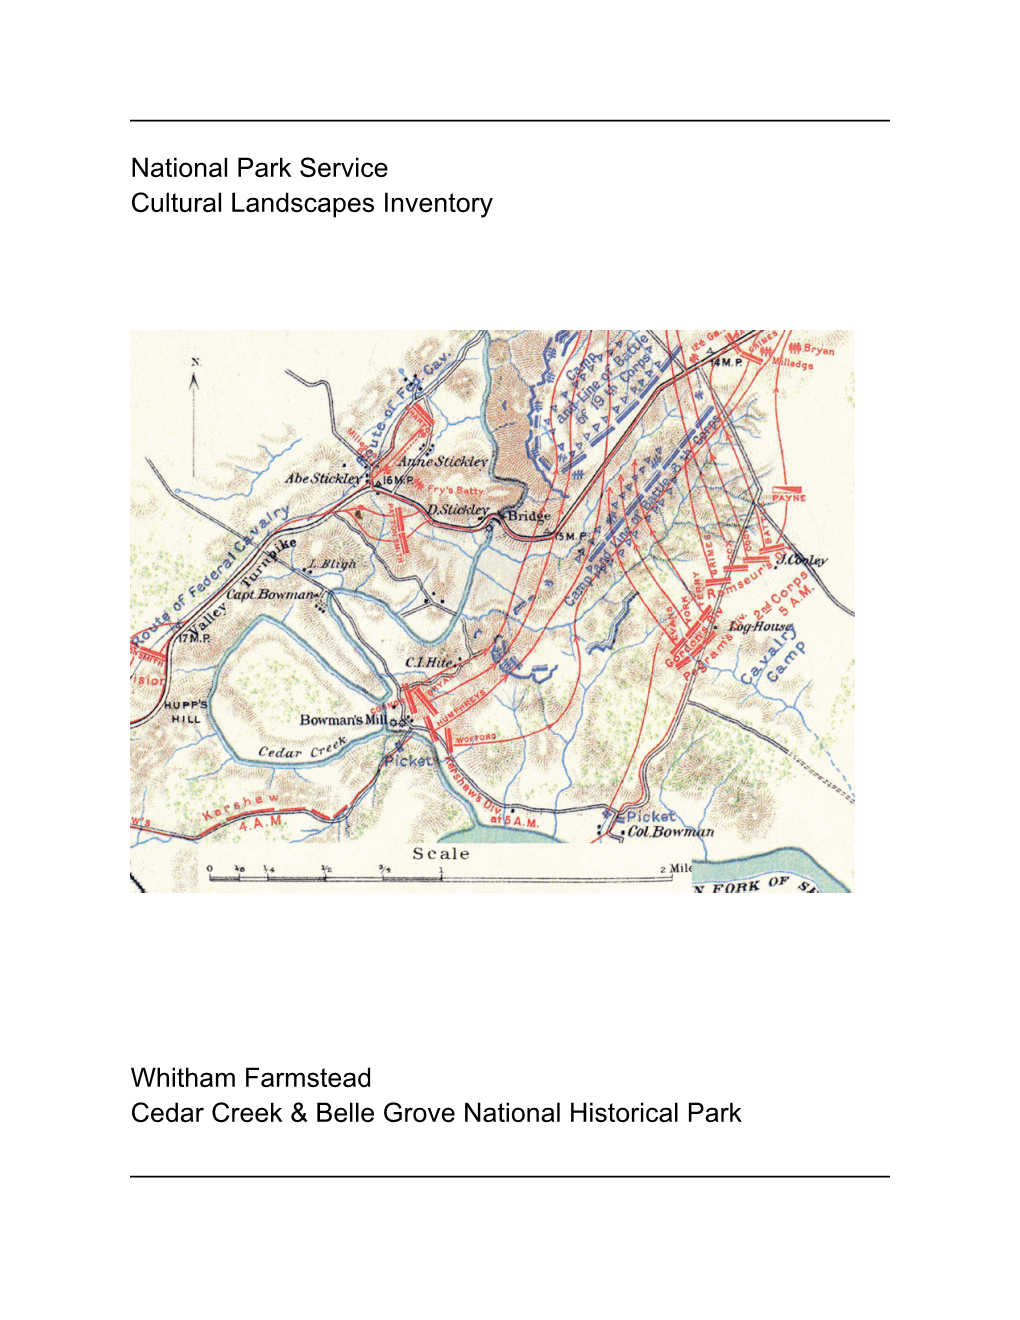 Cultural Landscapes Inventory: Whitham